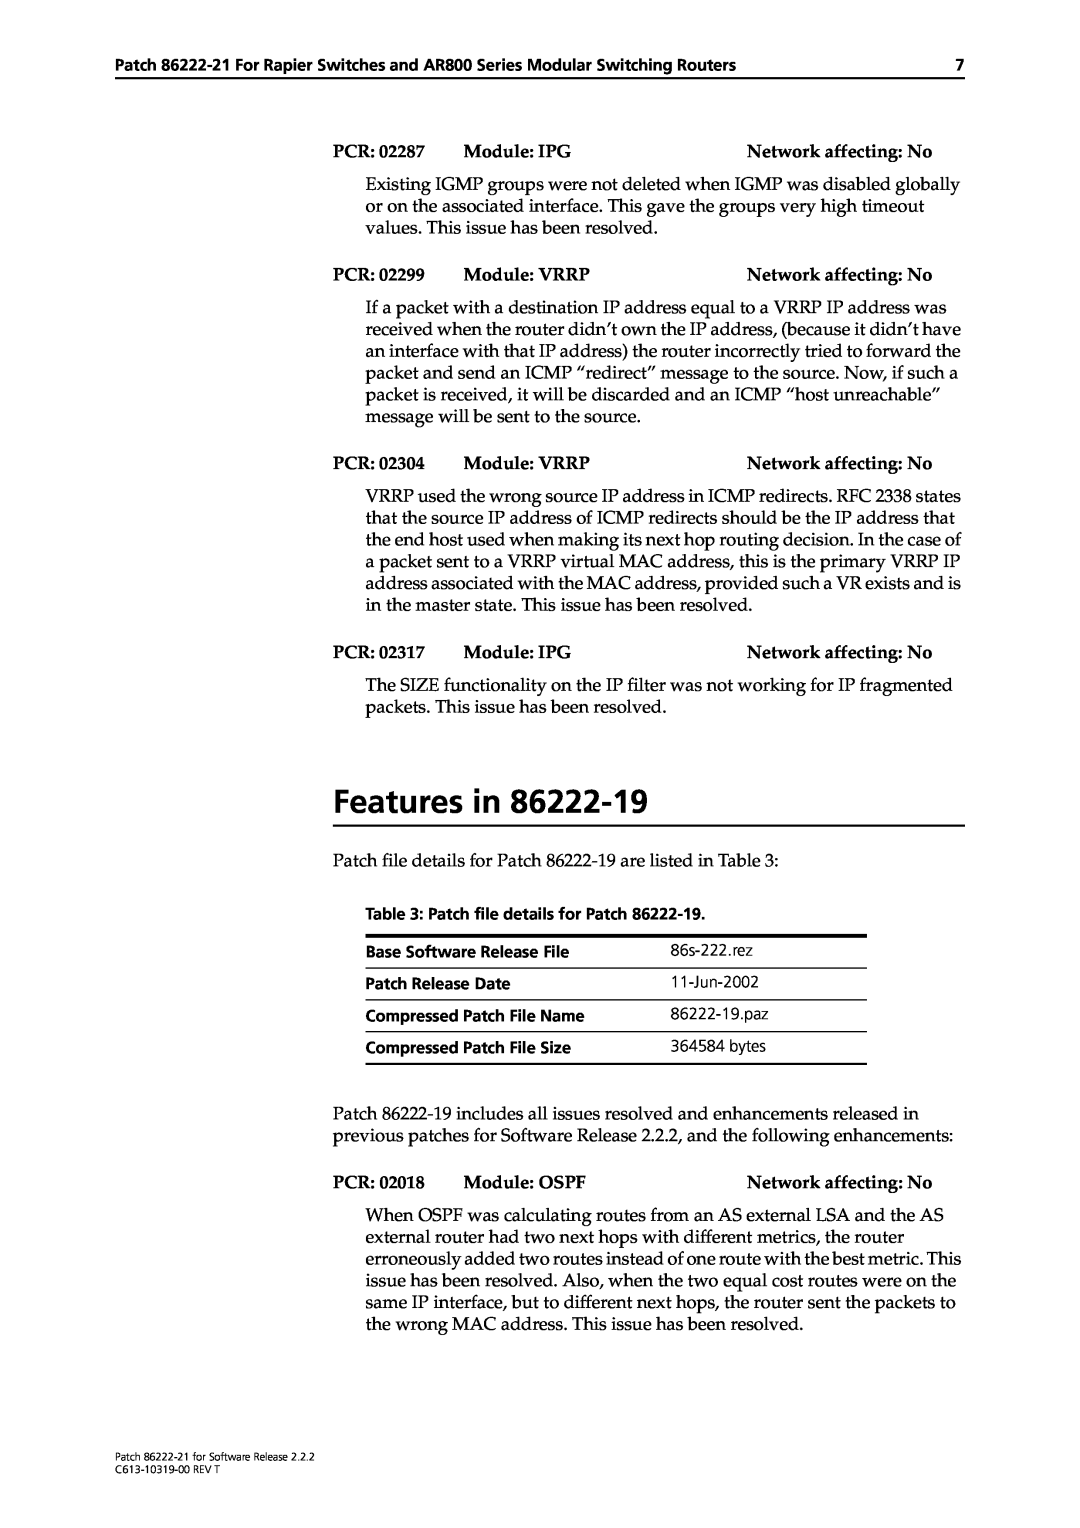 Allied Telesis 86222-21 manual Features in 